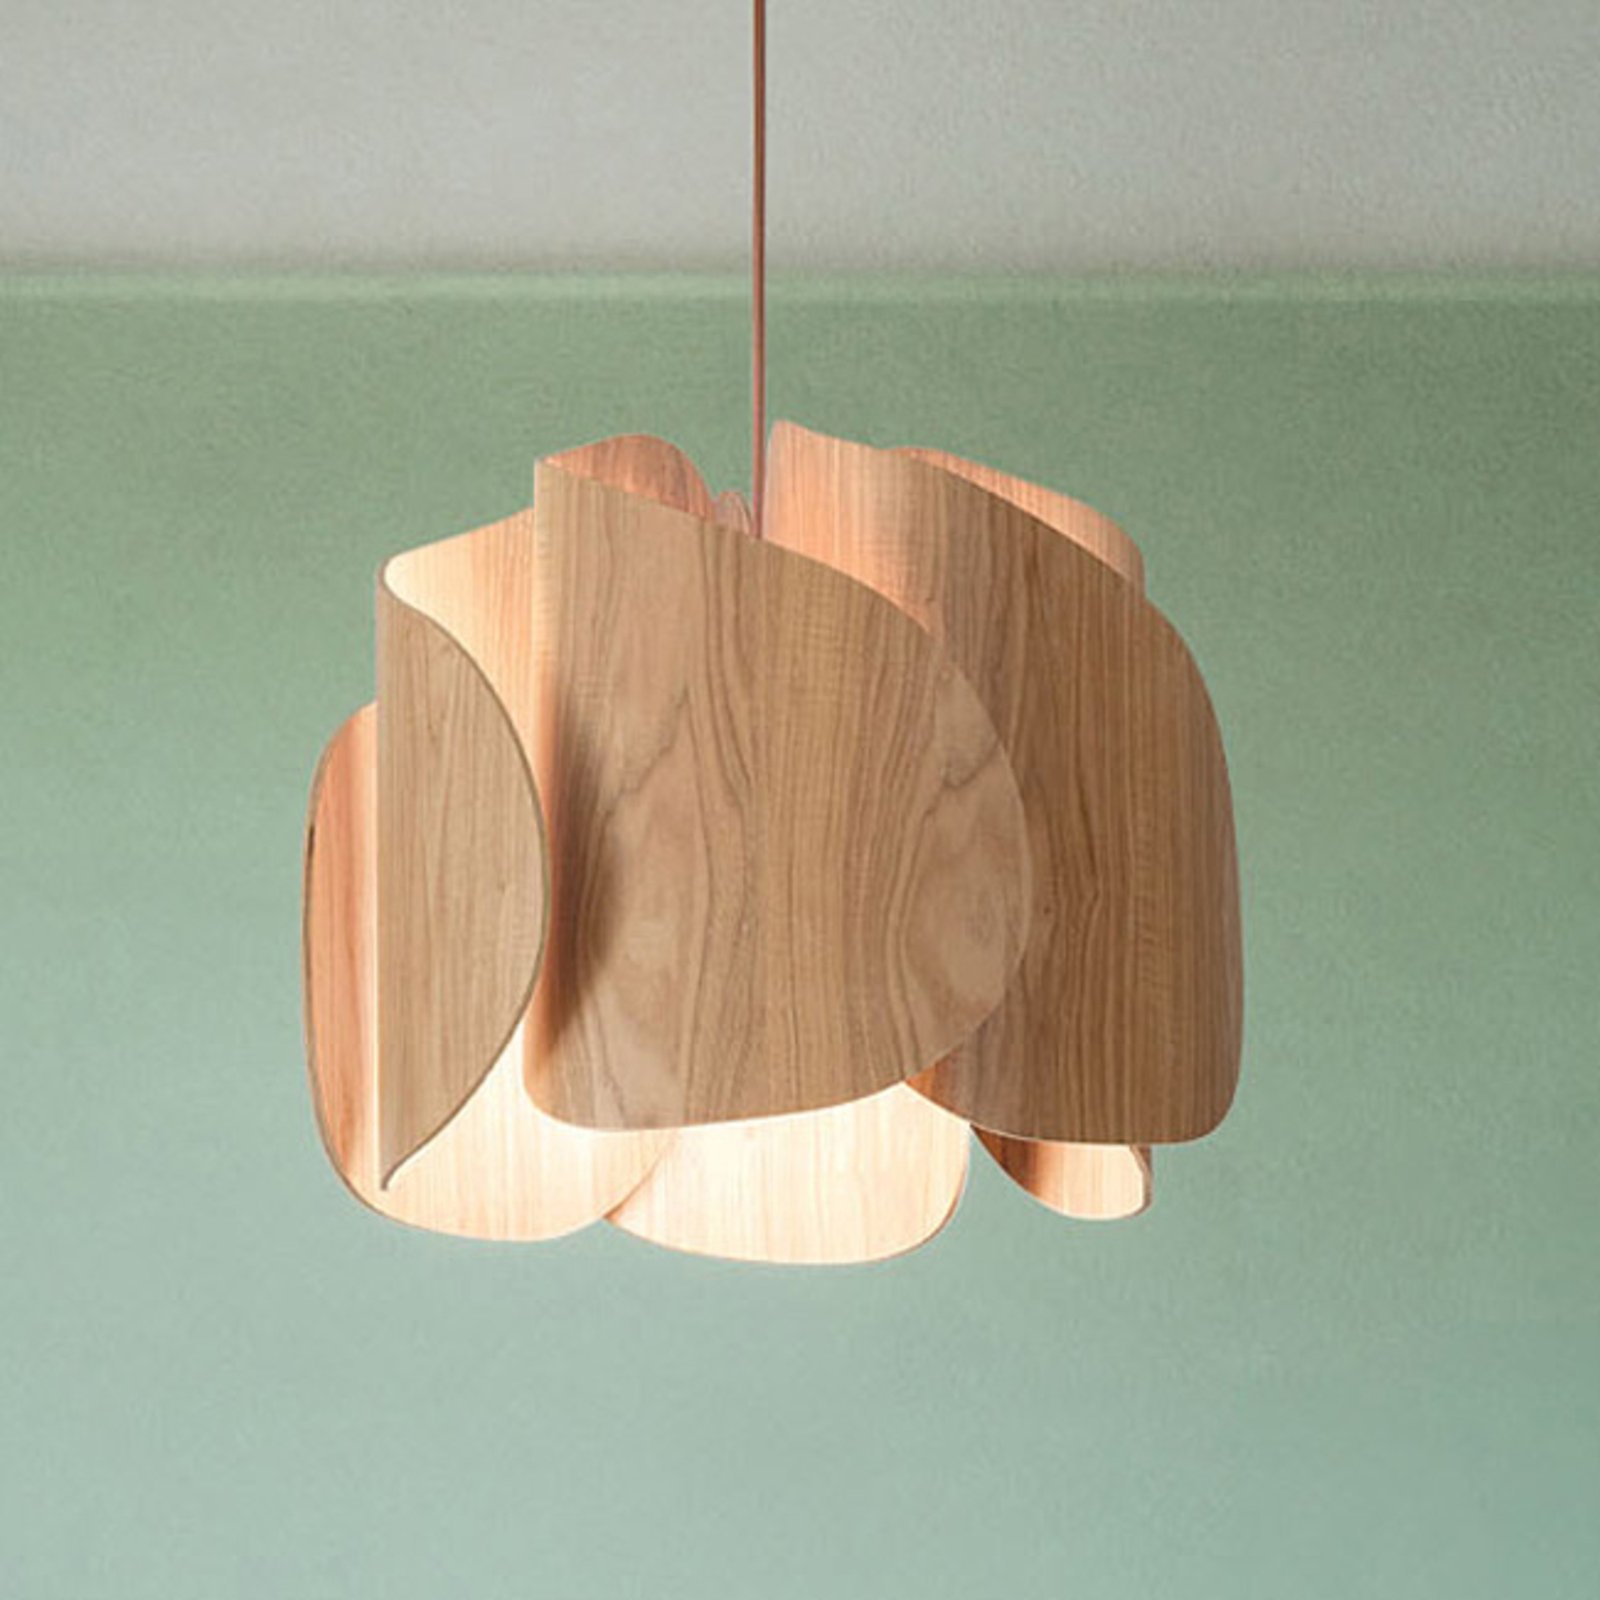 Hanging light Pevero in ash wood, curved shape